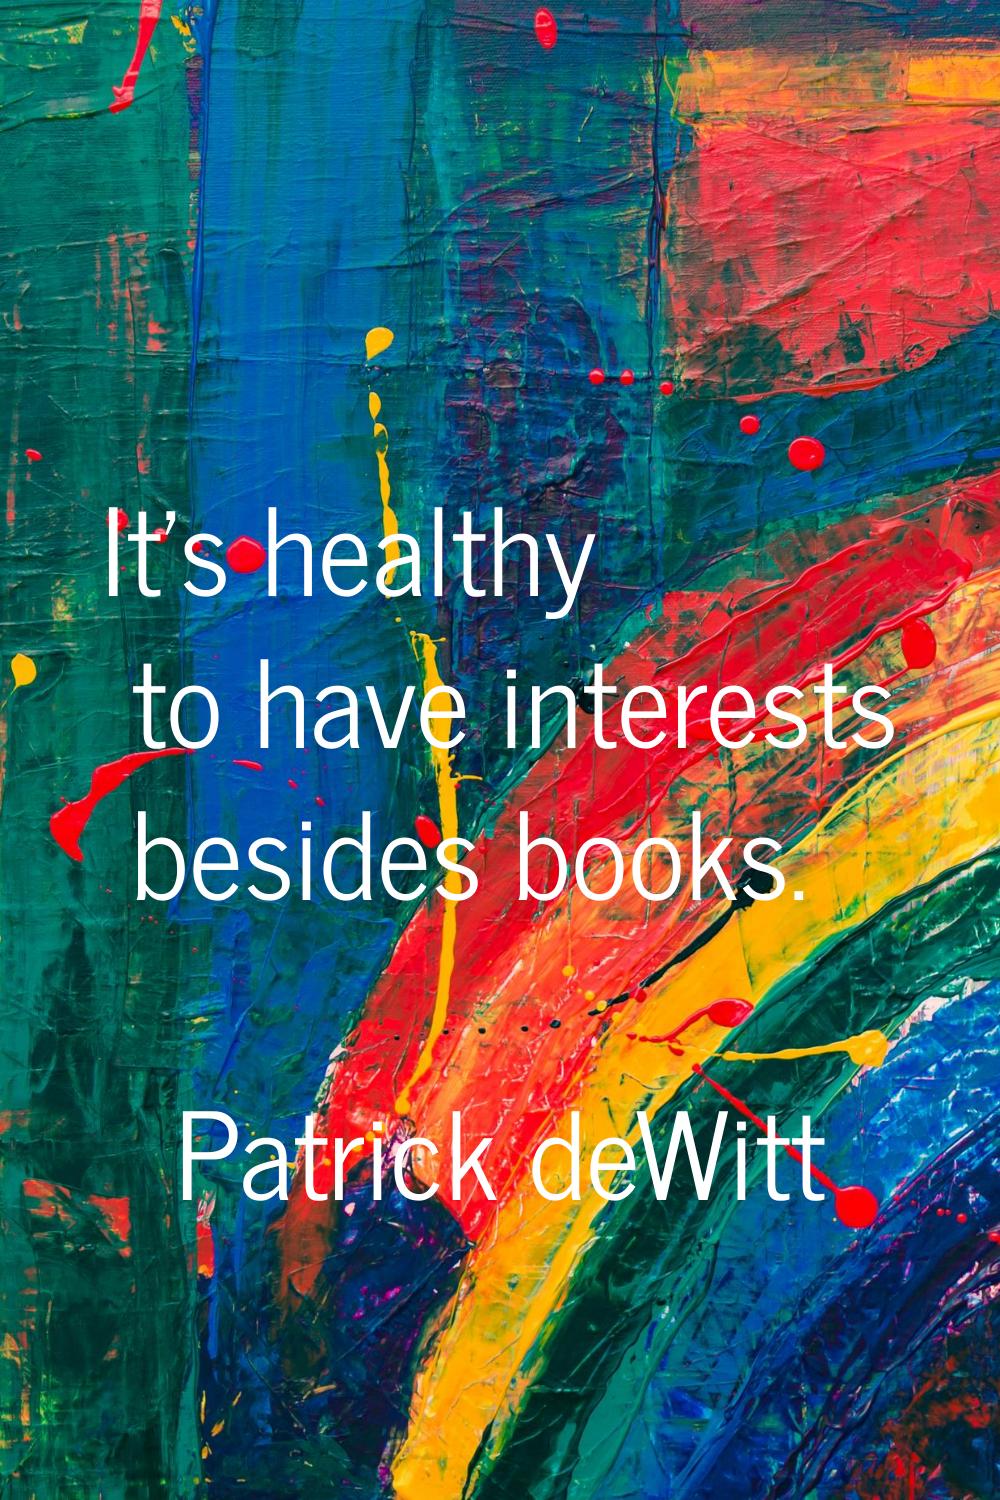 It's healthy to have interests besides books.